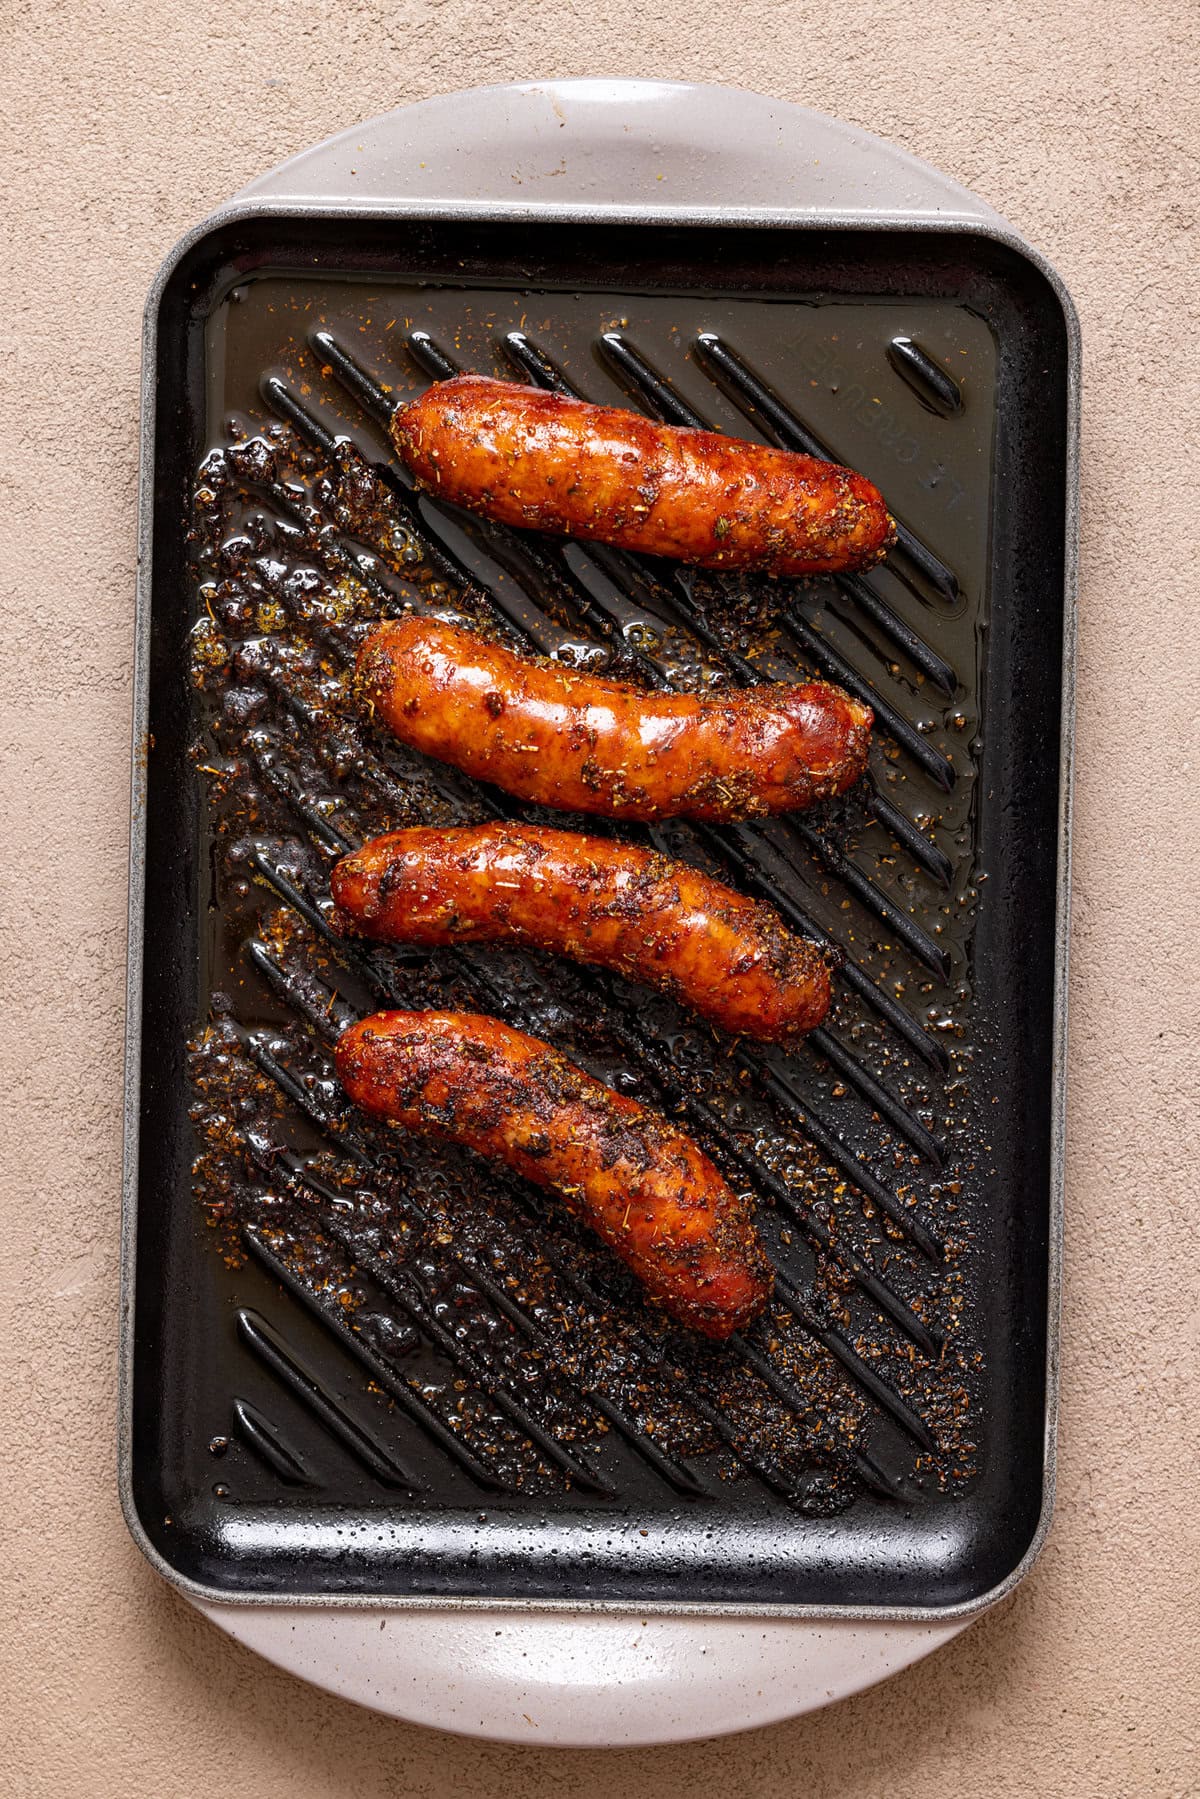 Grilled sausages on a grill pan.